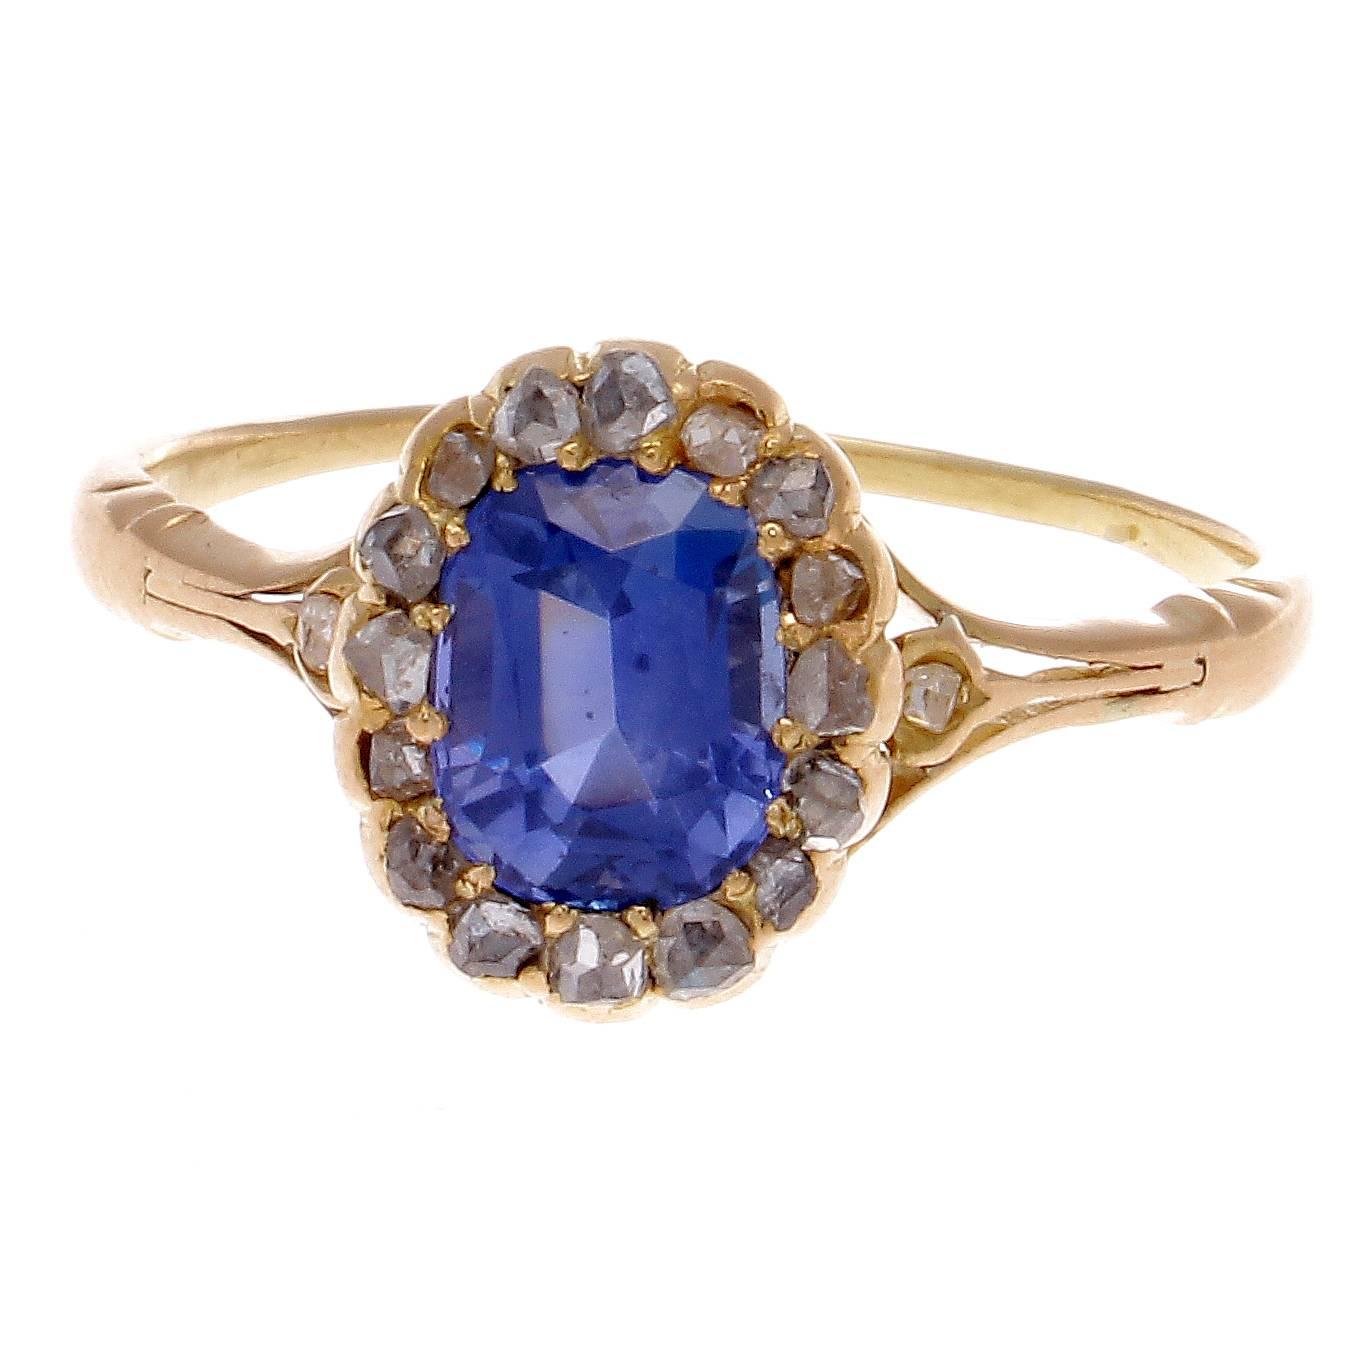 A strikingly colorful antique halo engagement ring that has withstood time, still being one of the most popular designs today. Featuring a vibrant royal blue sapphire that has been lassoed in by a ring of white, clean diamonds. GIA certified as